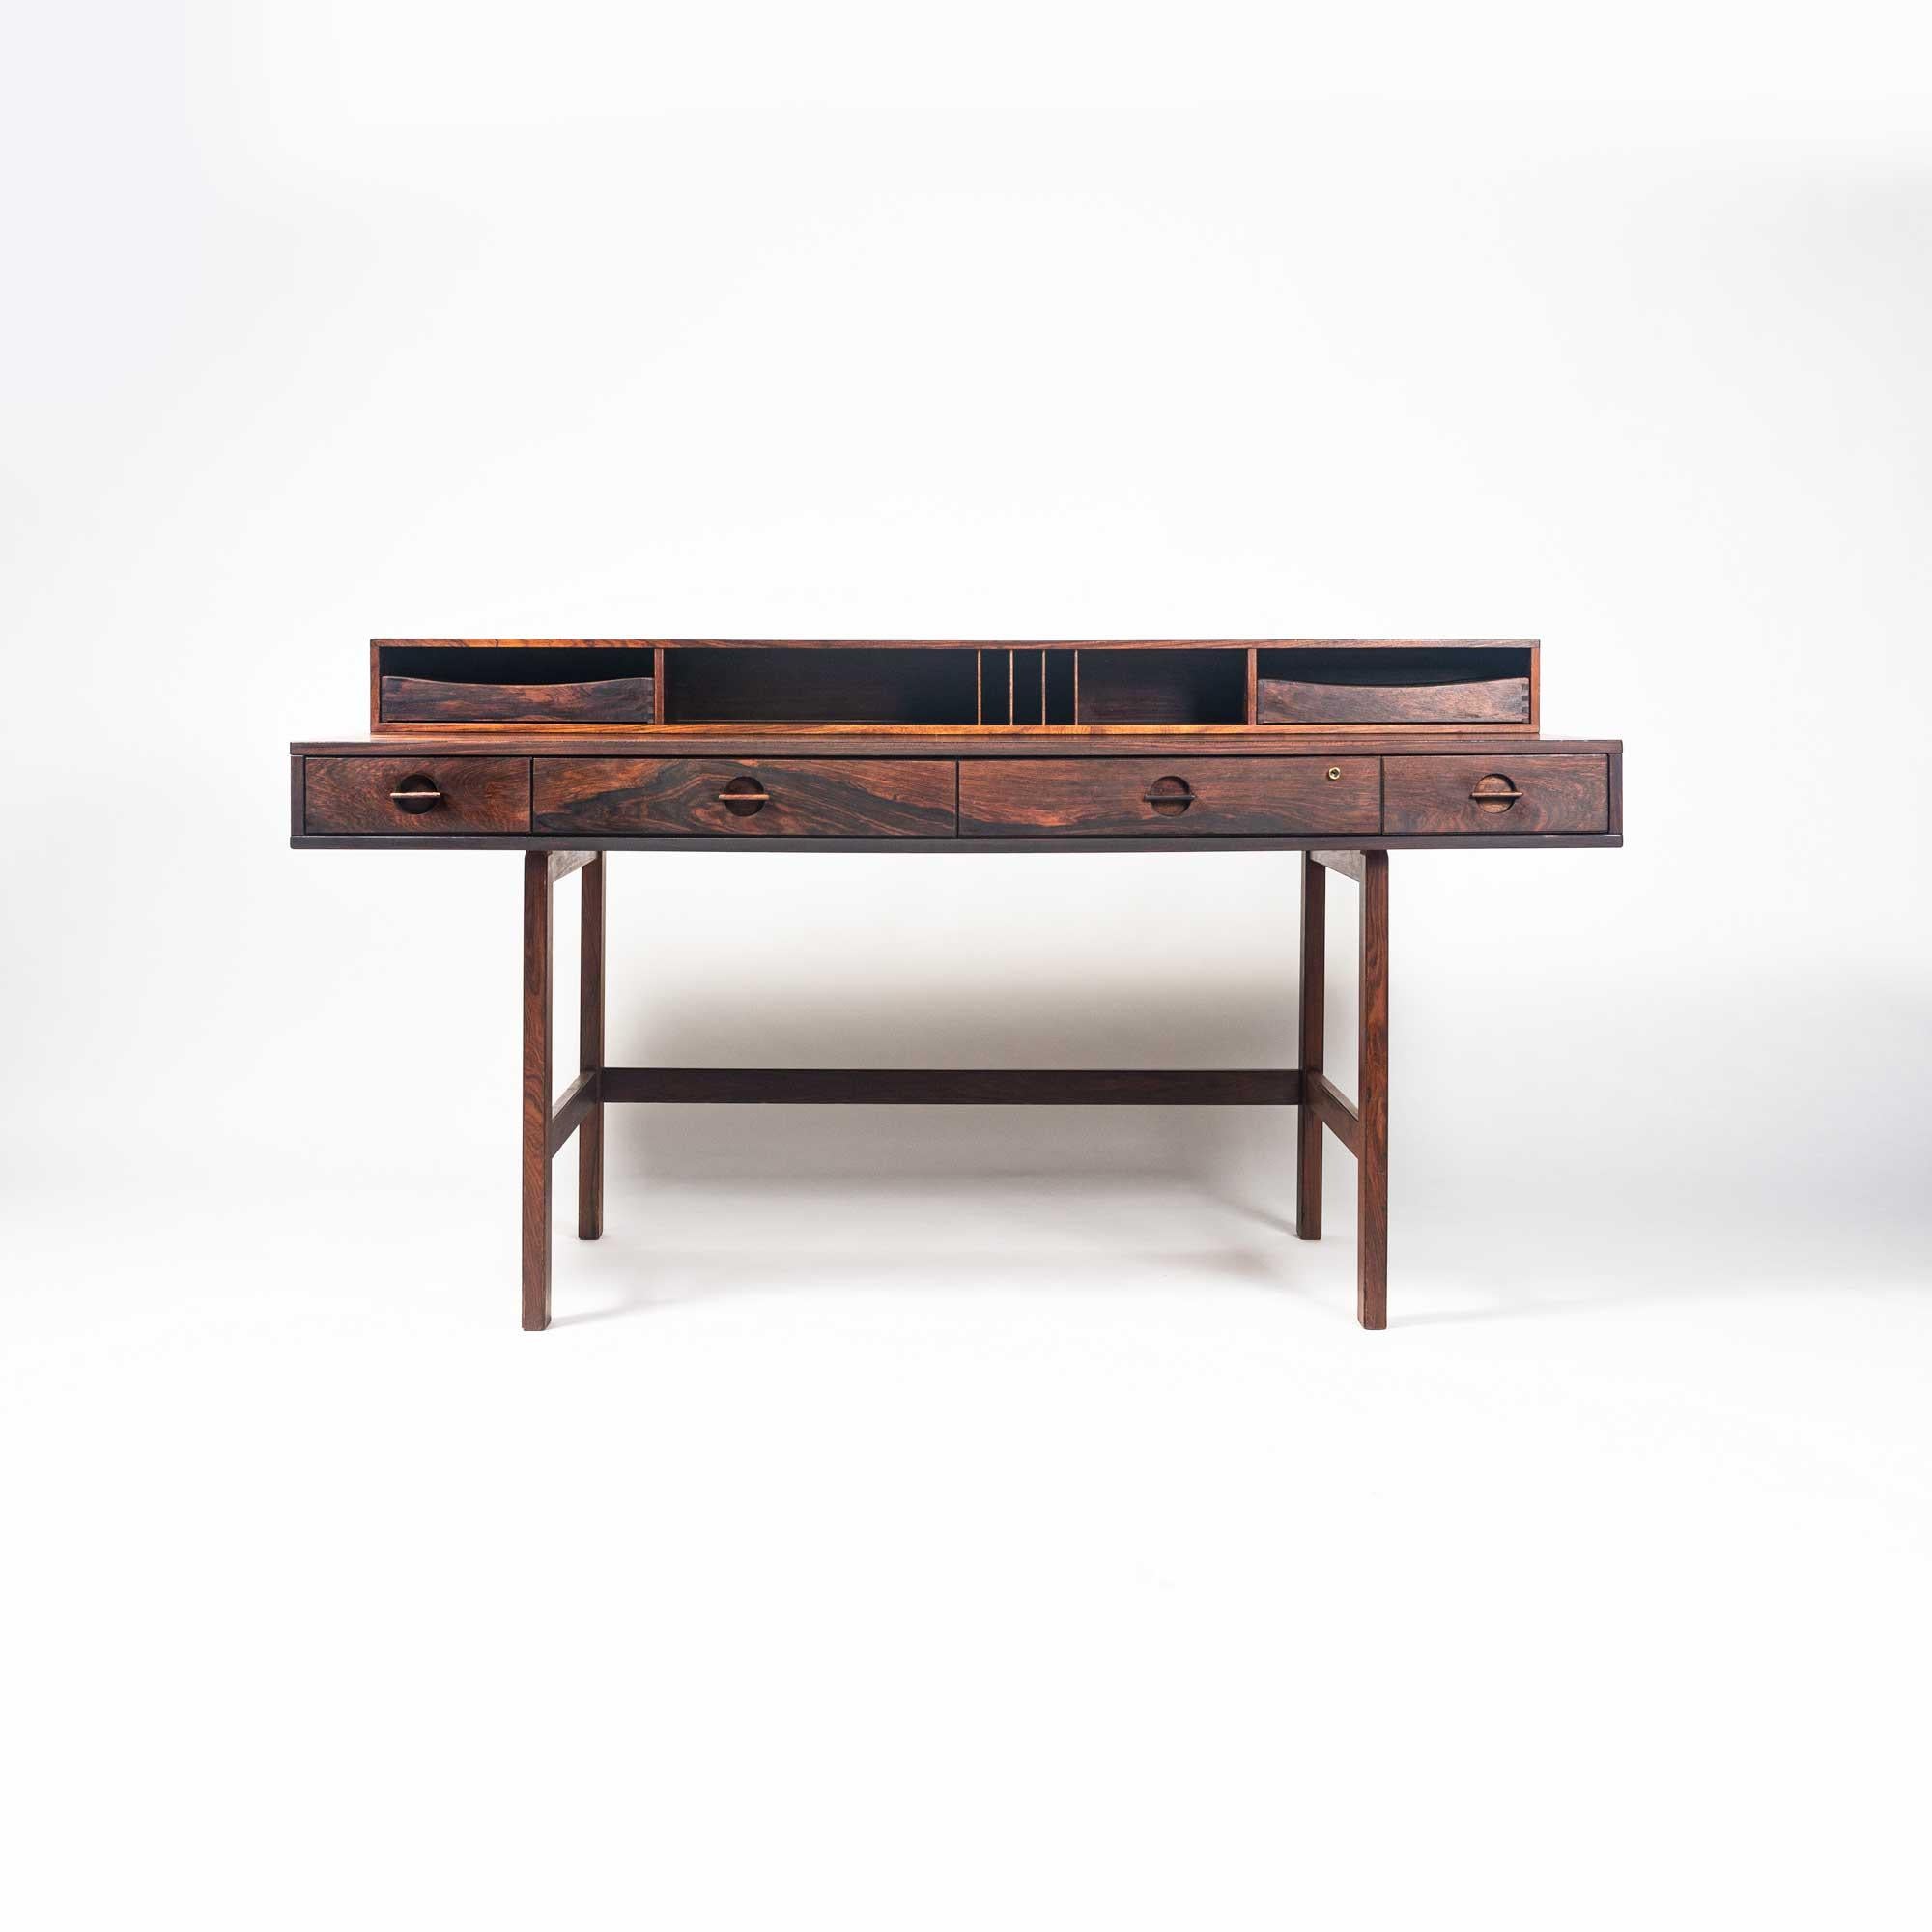 Extremely rare Flip top partner's desk by Peter Lovig Nielsen in rosewood with brass fittings. Retains original trays for the upper level cubbies. The top shelf of the desk flips down to extend the work surface allowing it to be used as a partner’s